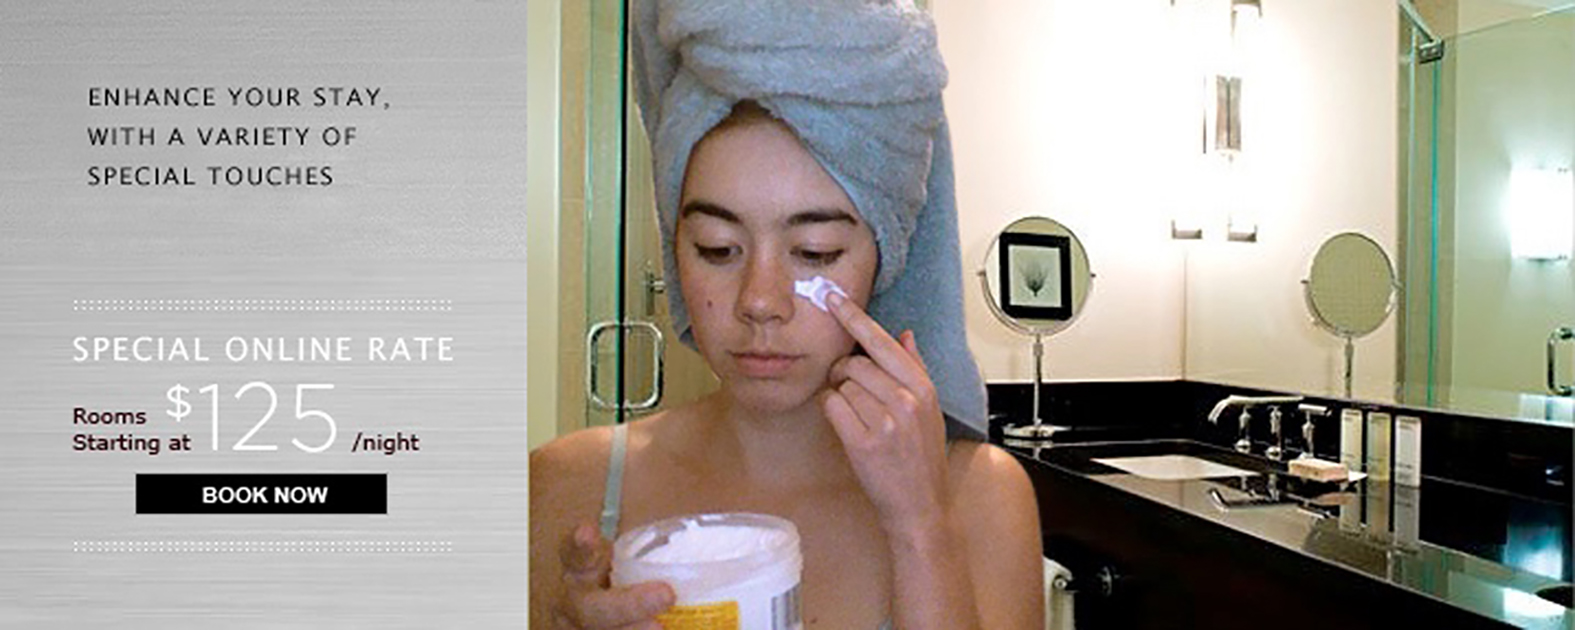 Jenny Odell with her hair in a towel, applying facial lotion, photoshopped into the bathroom in a hotel advertisement saying: Enhance your stay with a variety of special touches.